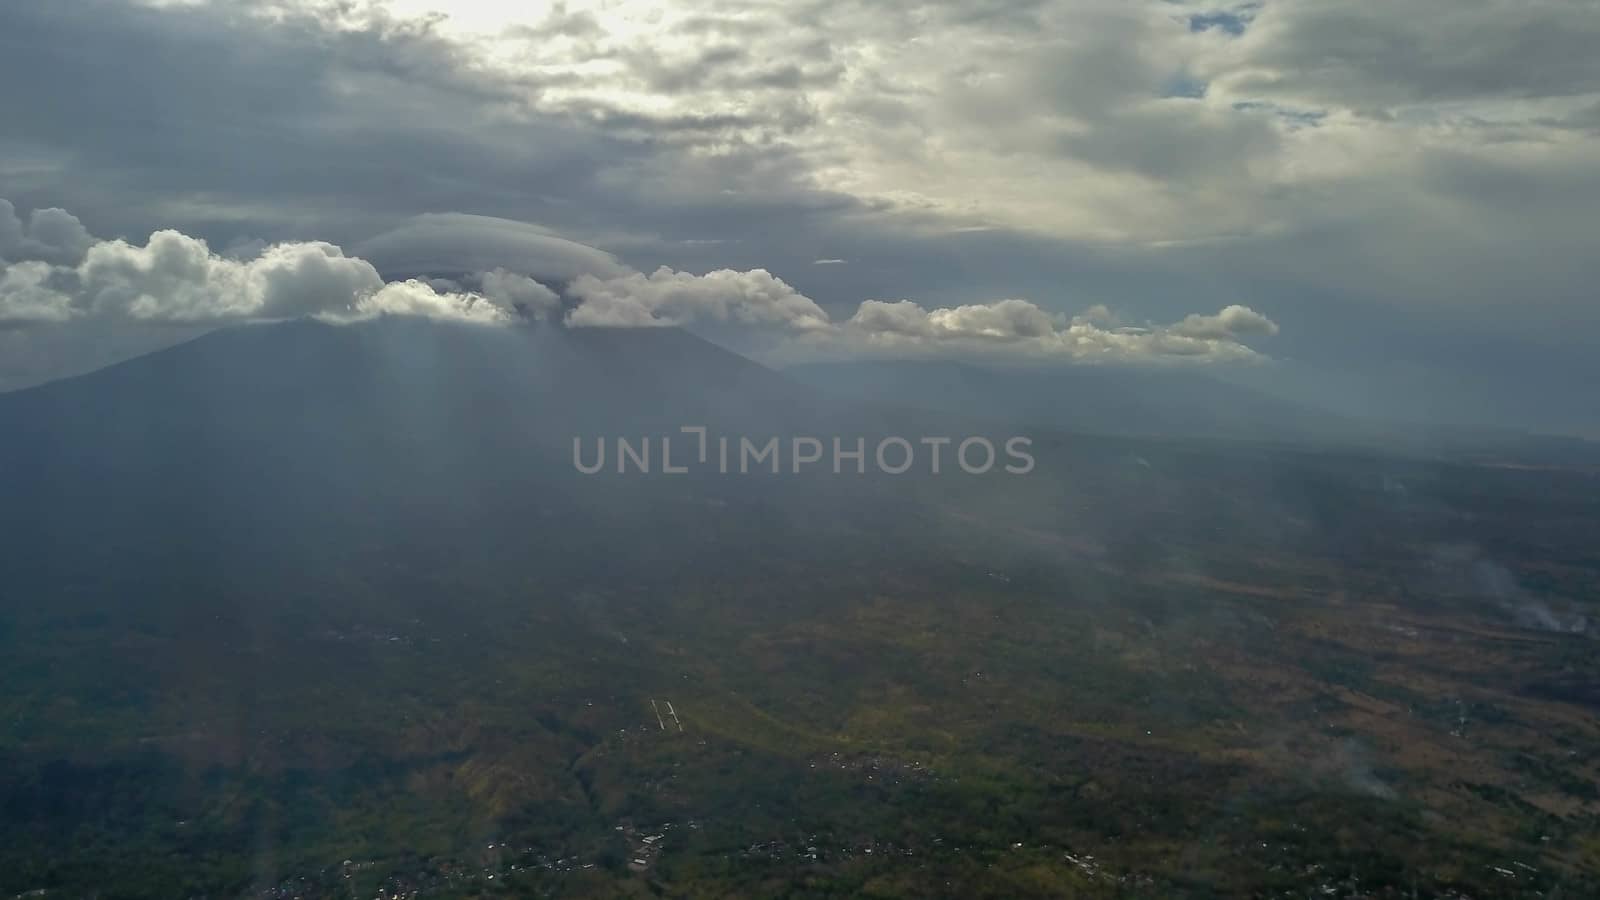 volcano with cloudy clear sky. Mount Merapi in Indonesia. Cloudy sky with a volcano in the background. Clouds around the top of the mountain. The sun's rays shine through the clouds.